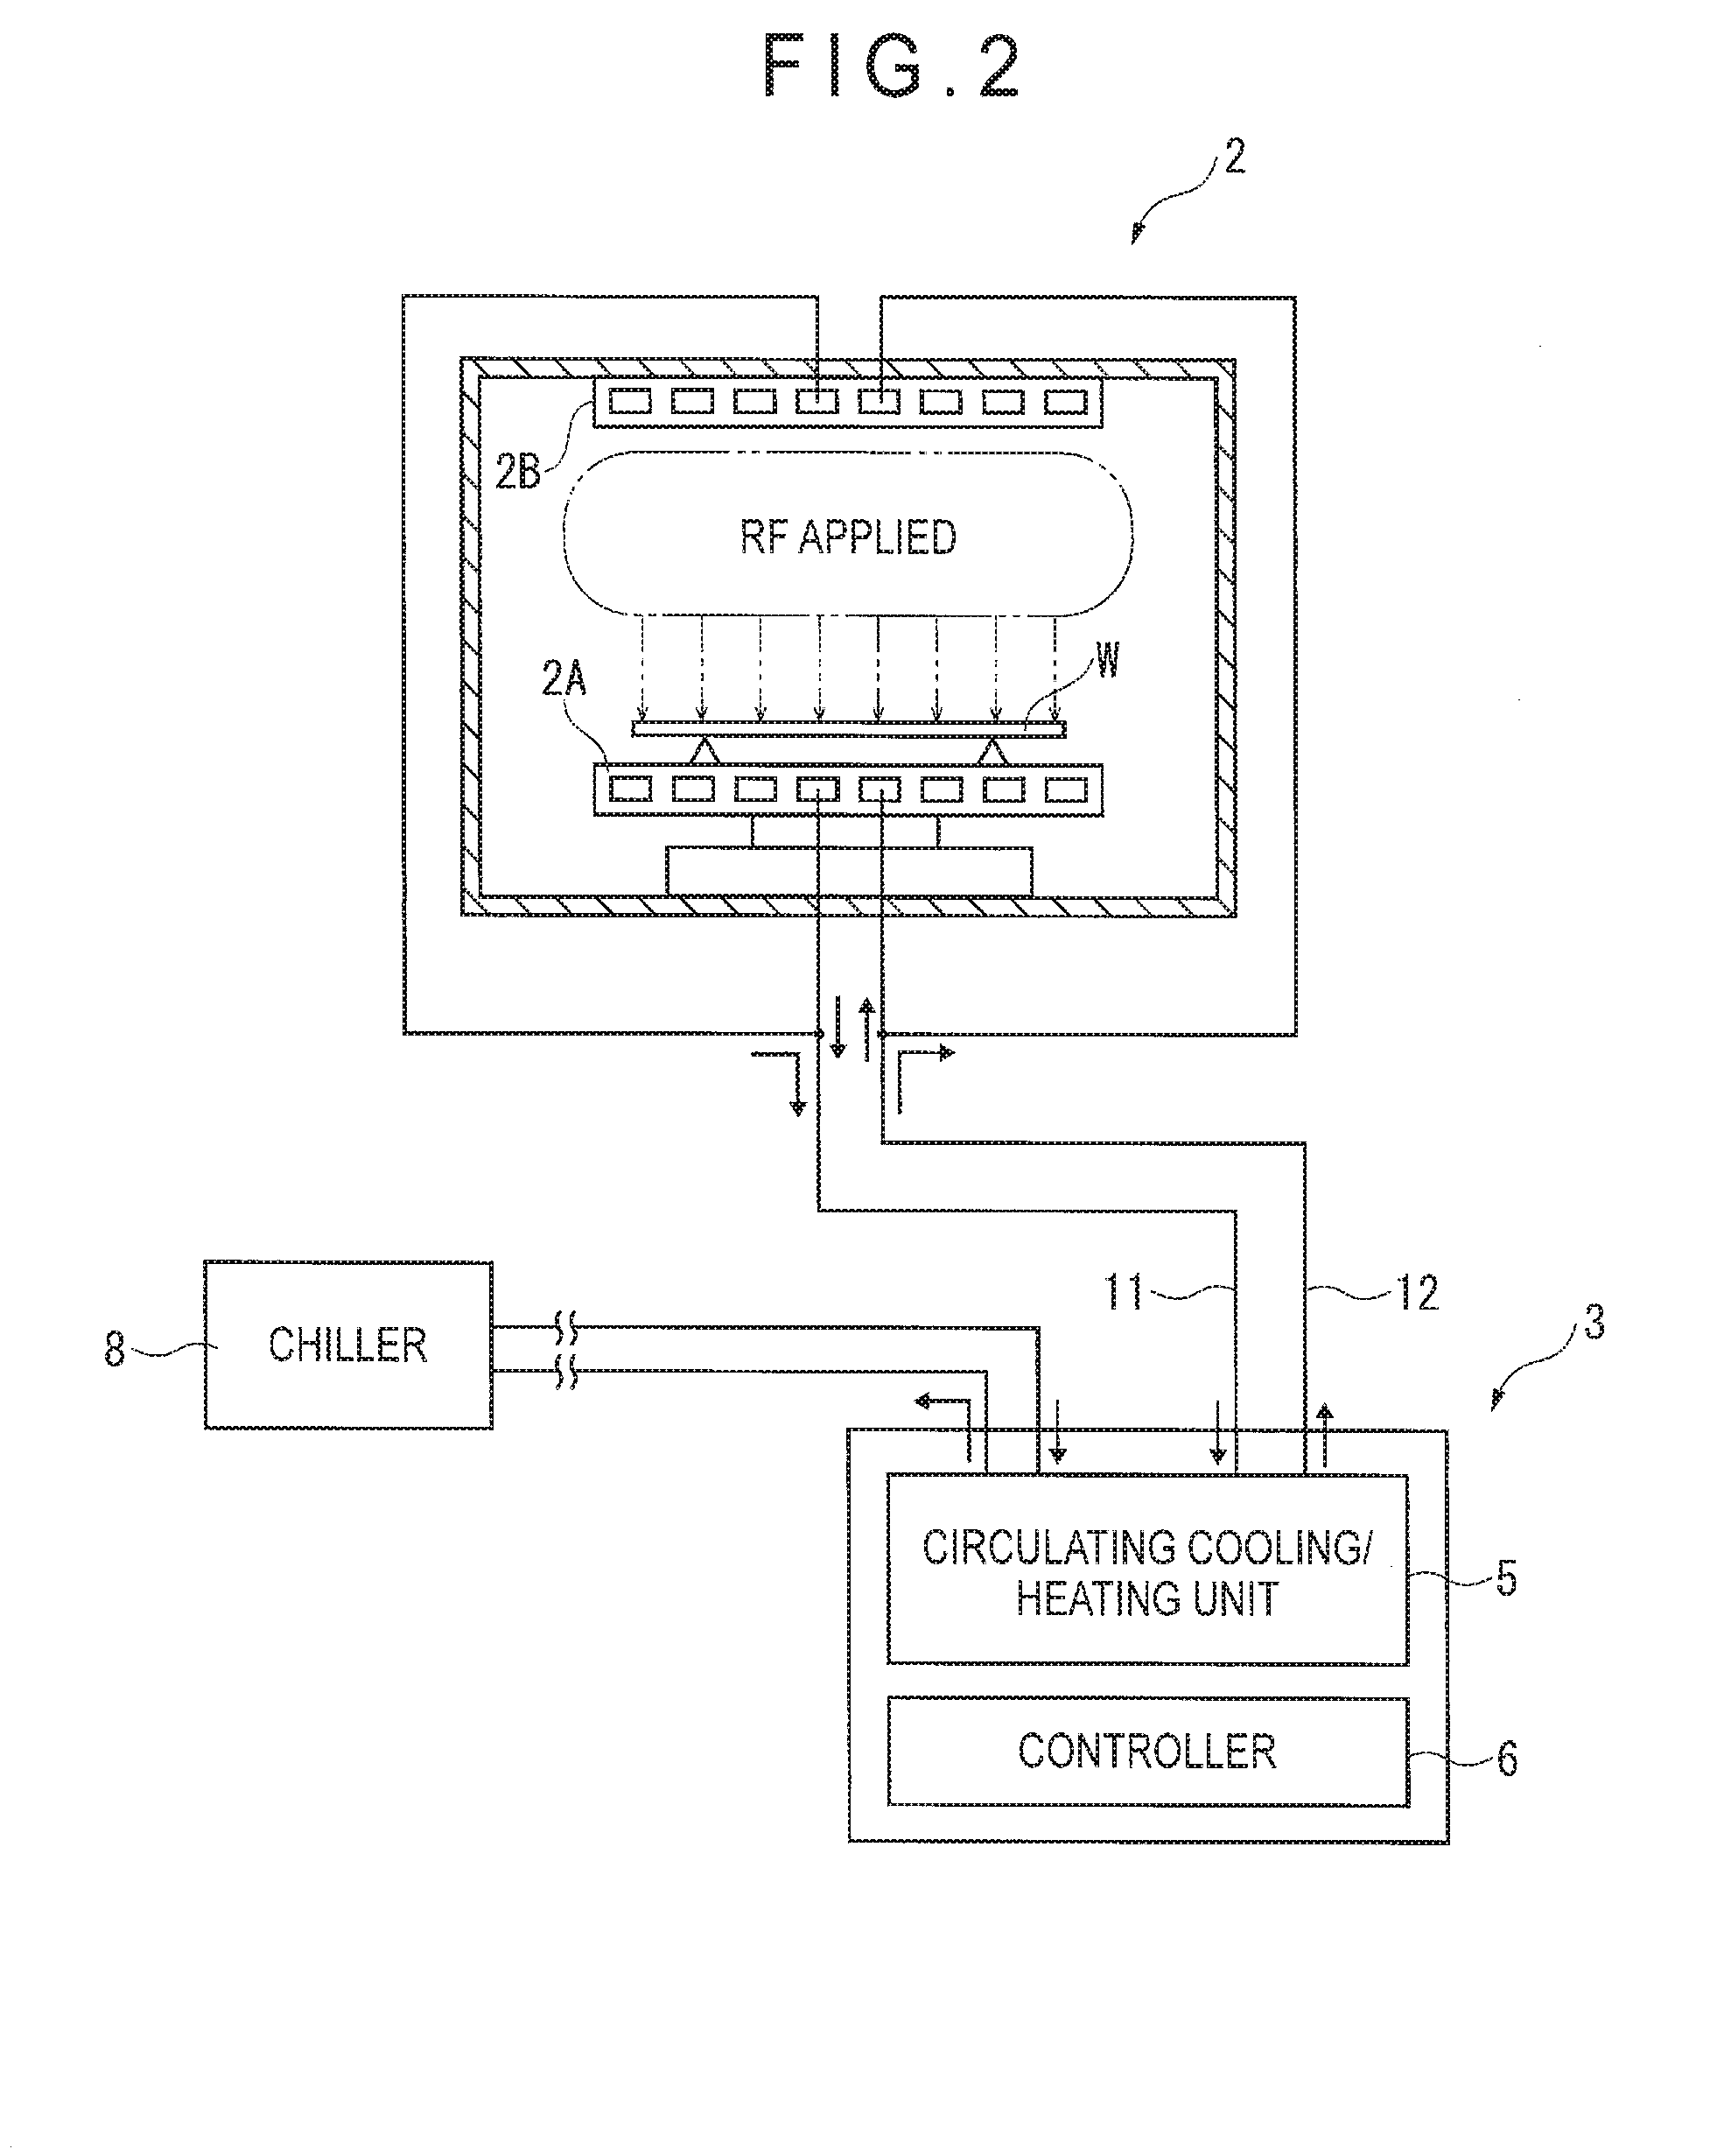 Circulation cooling and heating device